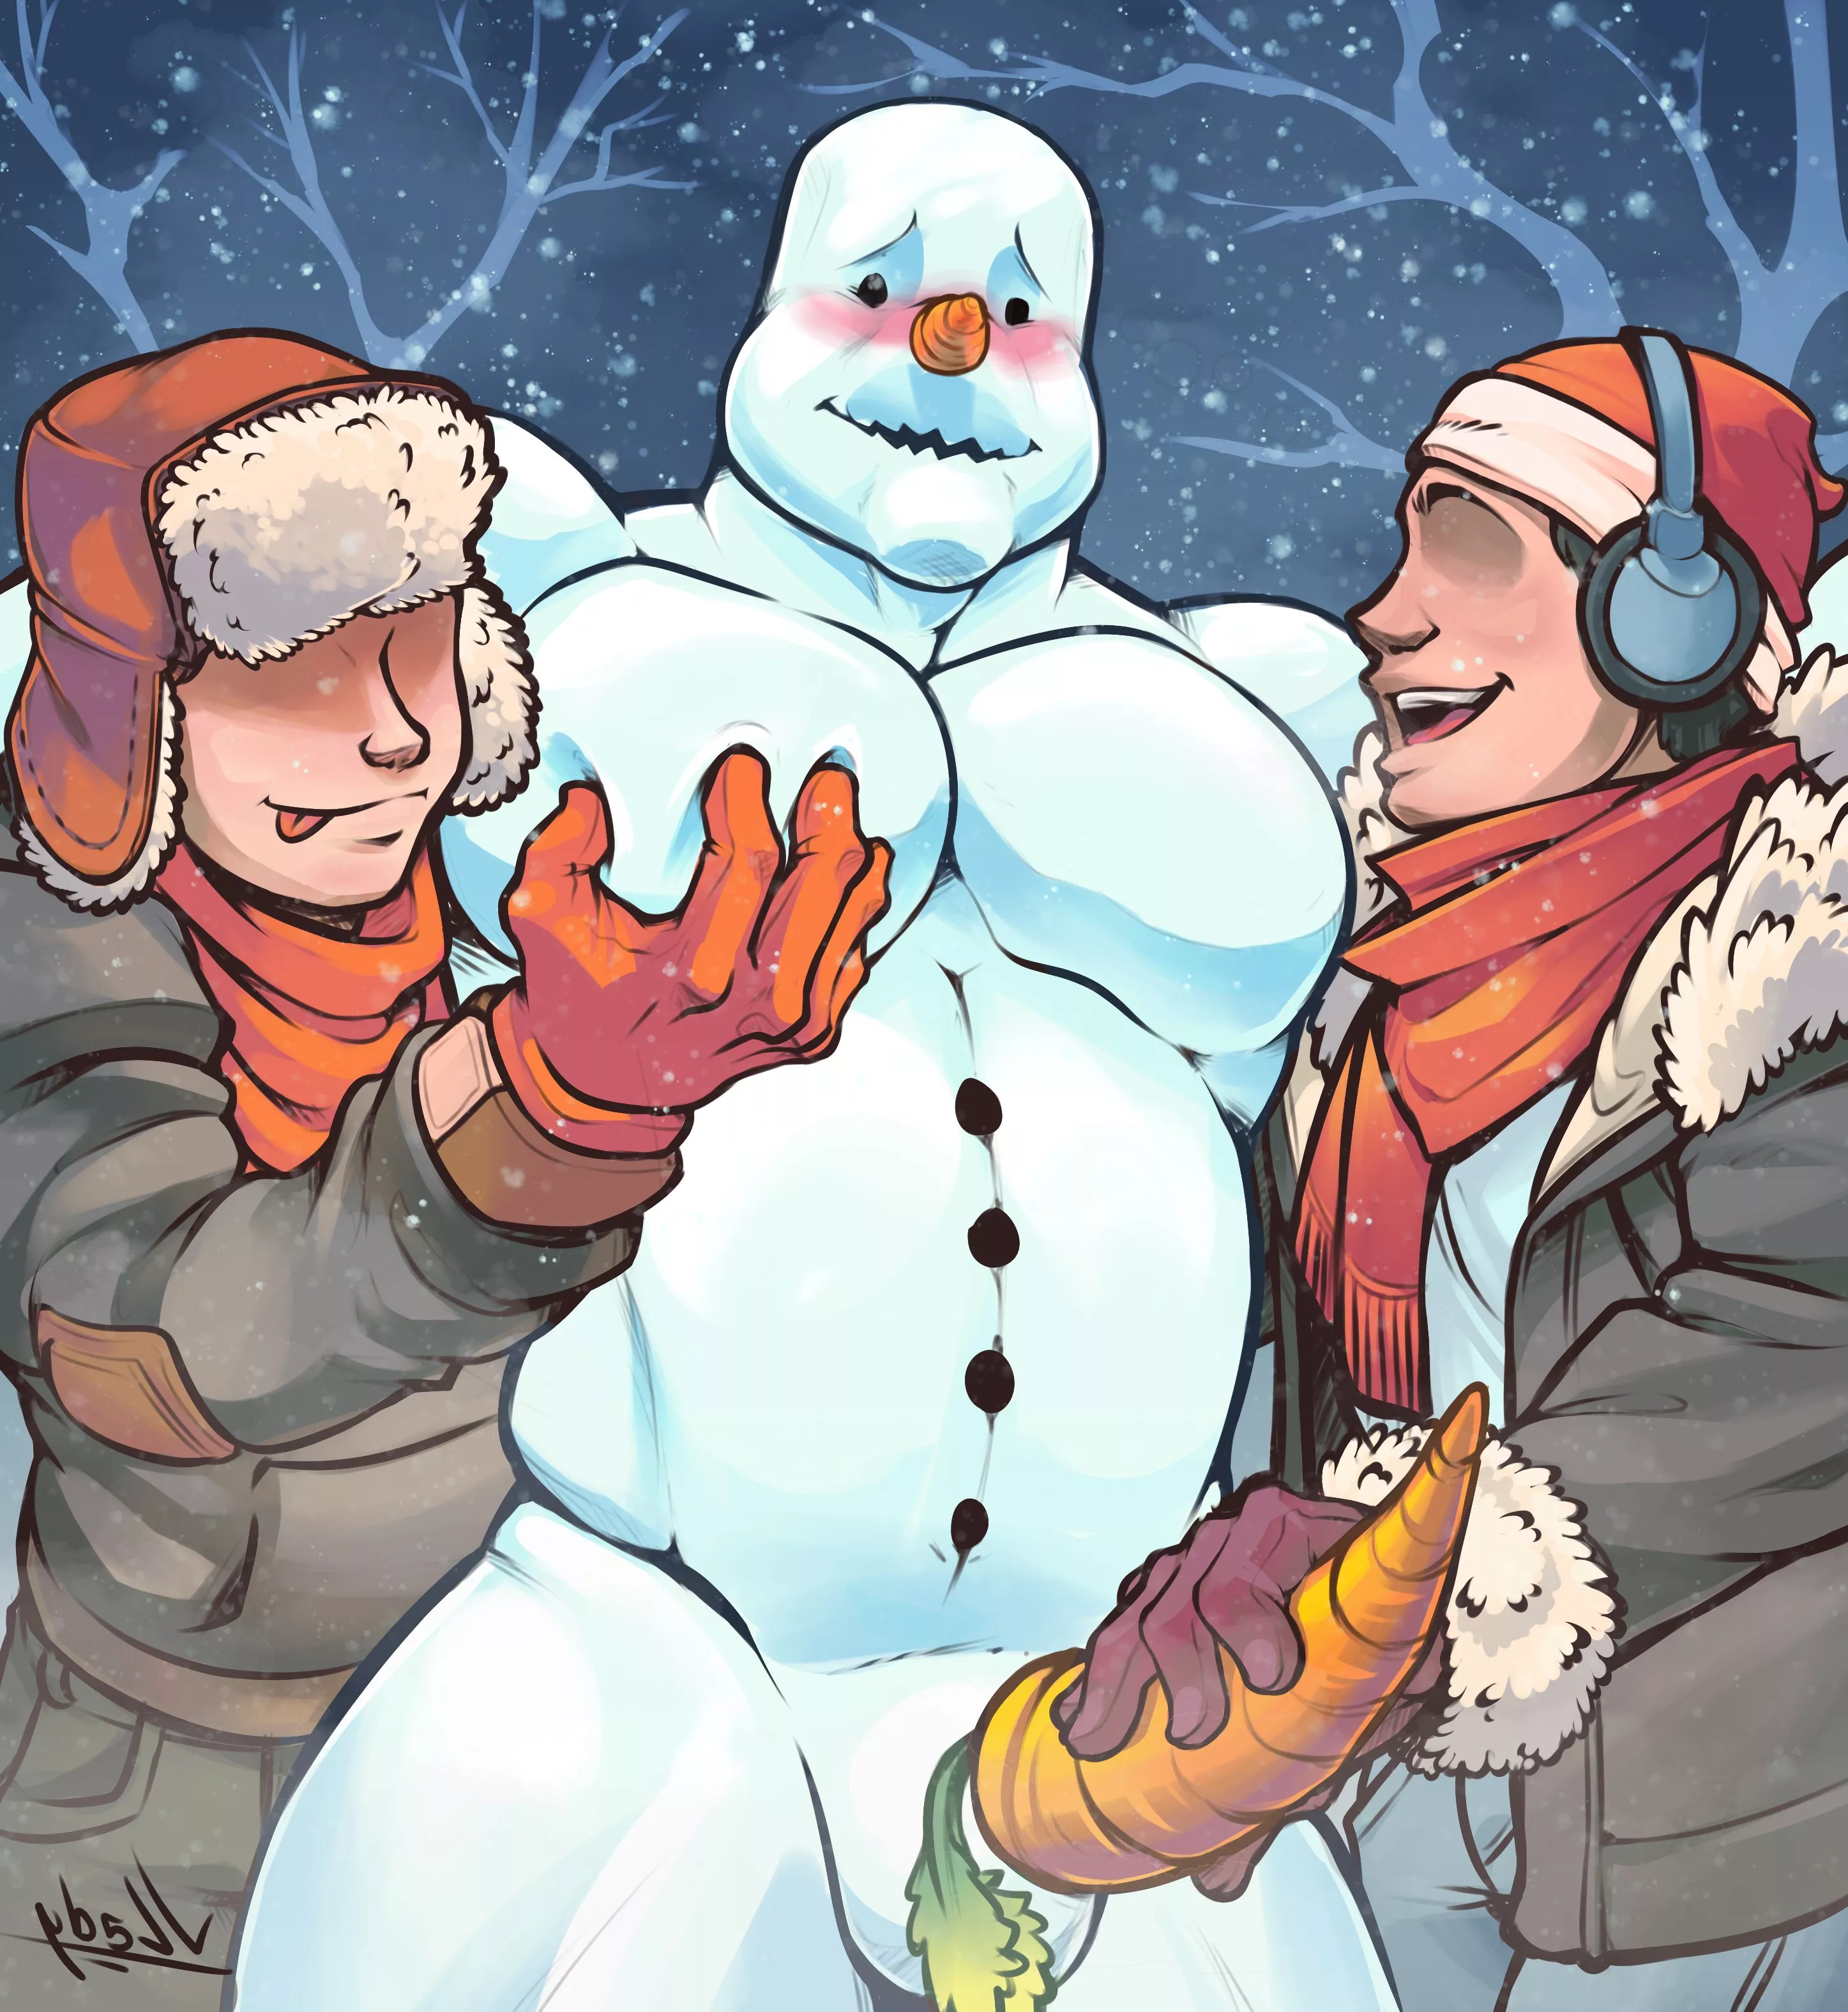 Snowman Porn - Lets make a snowman nudes in rule34gay | Onlynudes.org